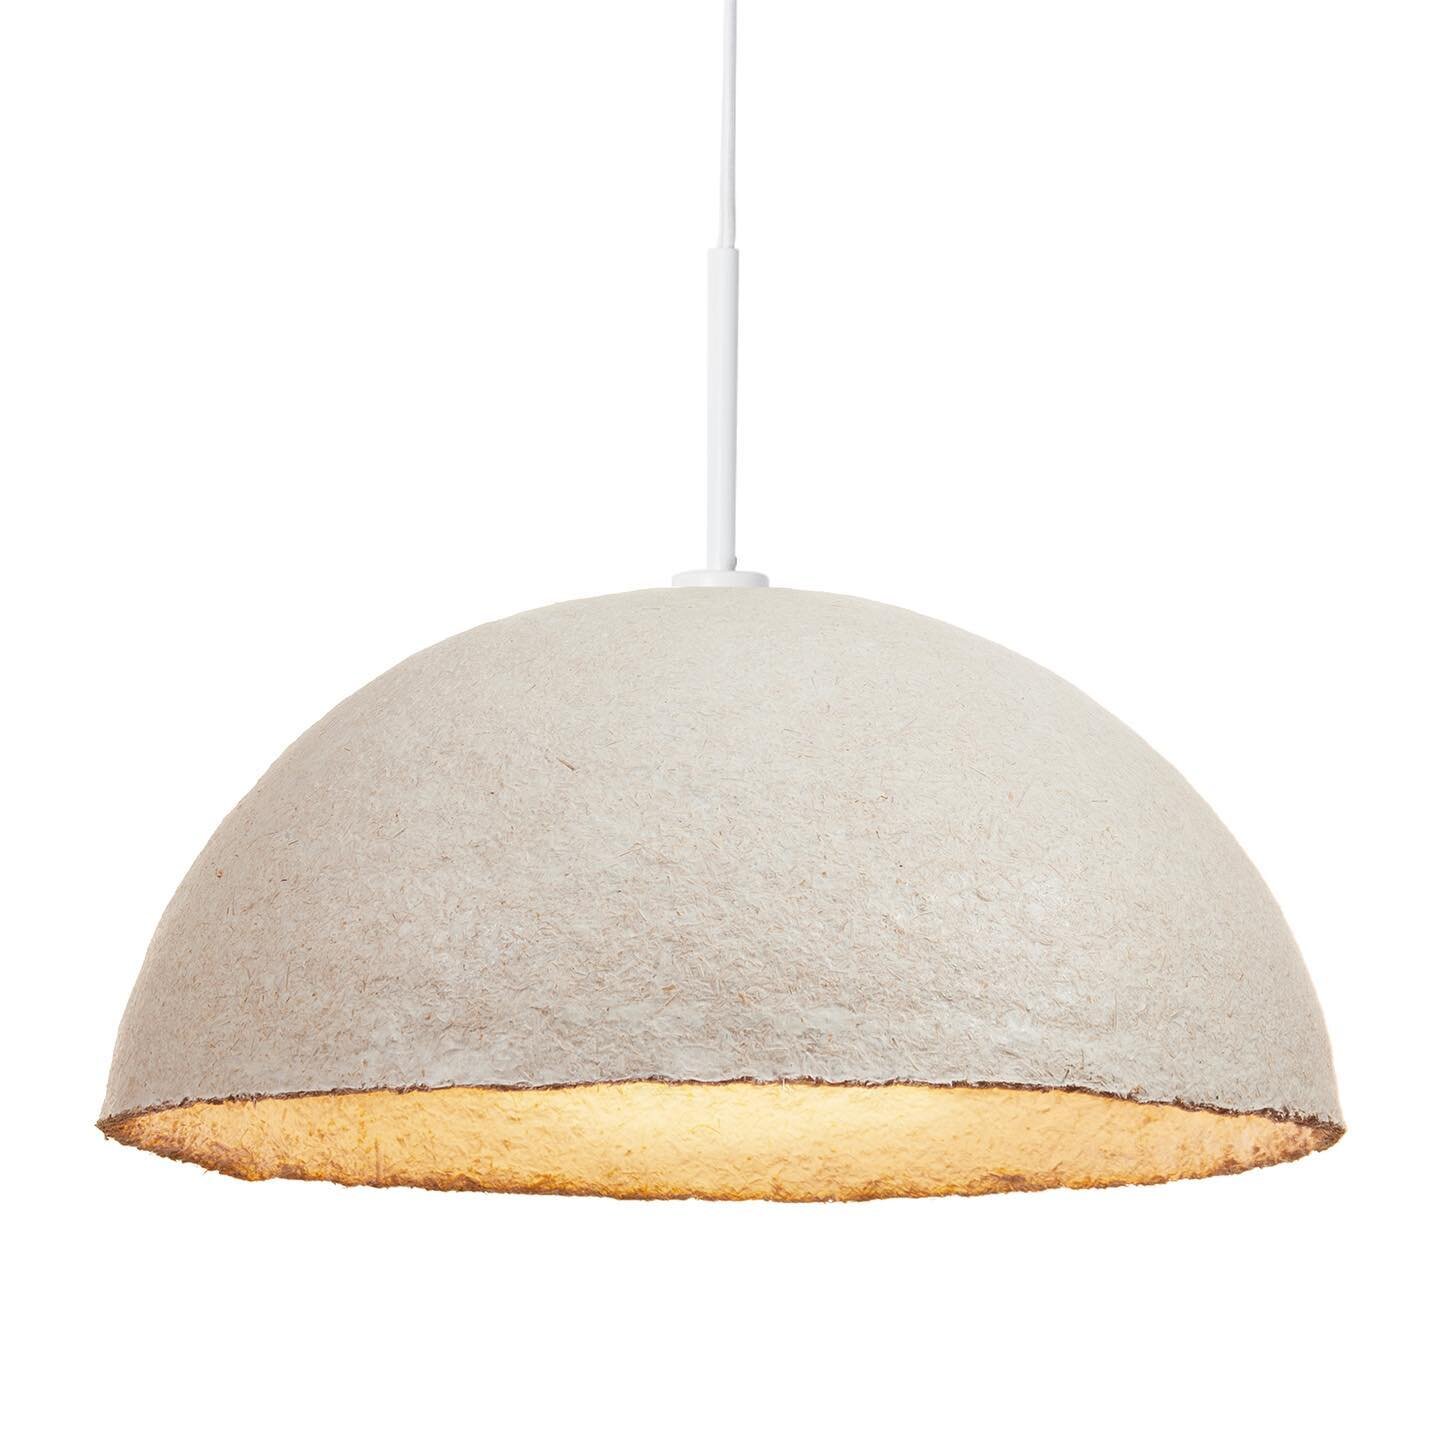 MushLume Hemi Pendant is all about pushing interior lighting to the limits with a 23&Prime; diameter dome structure made from natural, sustainable and biodegradable mushroom material. It&rsquo;s a sizable representation of the adaptability of this dy